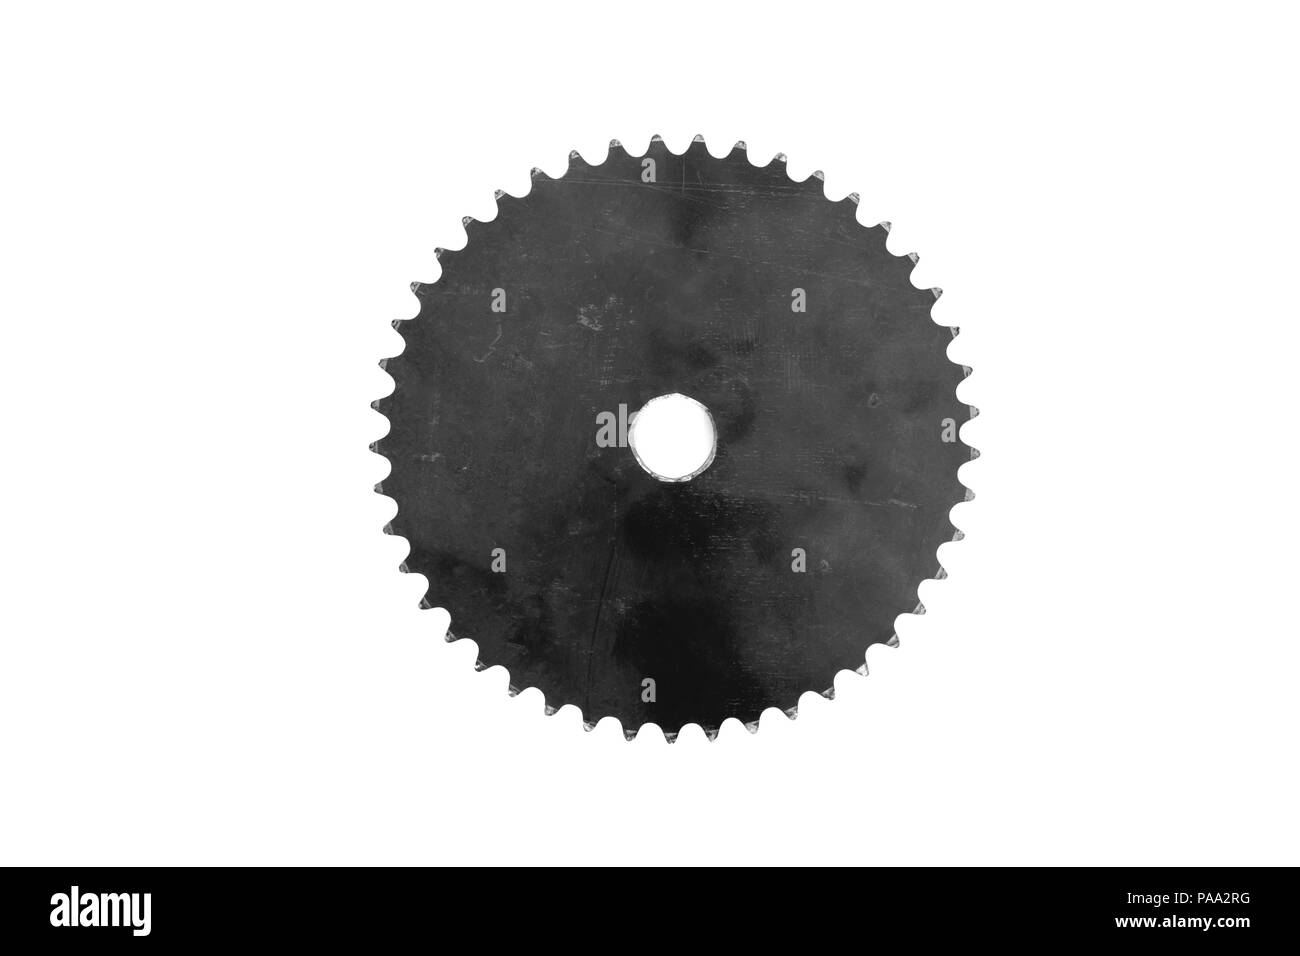 Old and dirty metal gear cog on white background. Black and white tone. Stock Photo